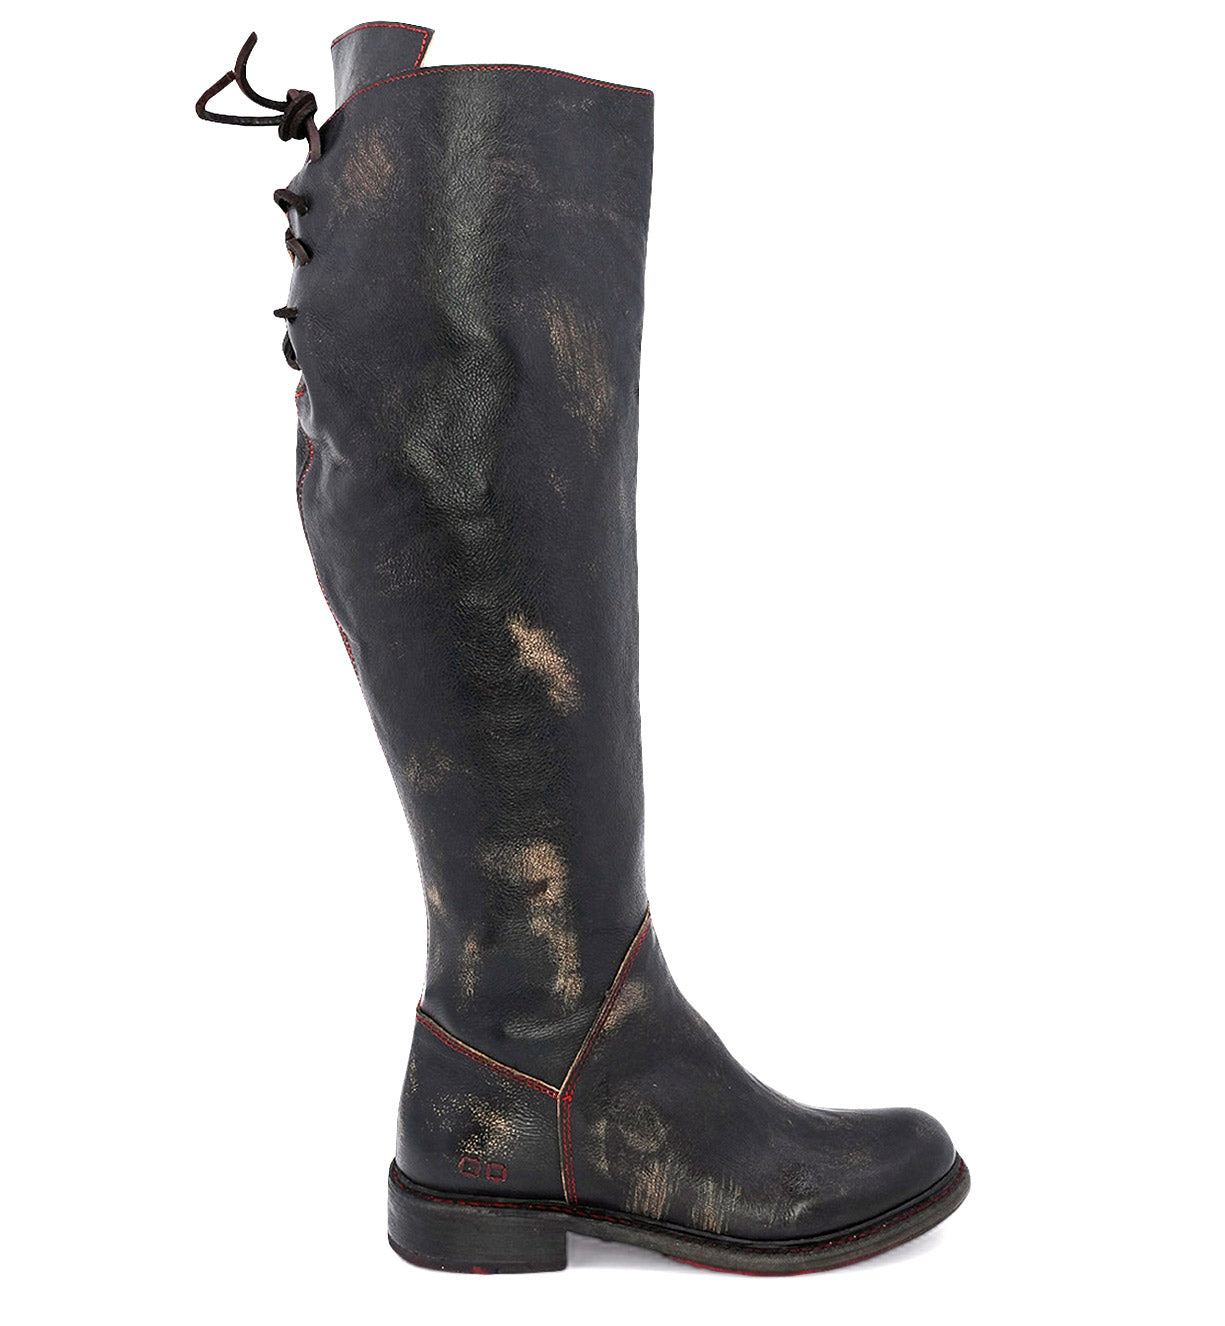 A women's black leather knee high boot, the Manchester Wide Calf by Bed Stu.